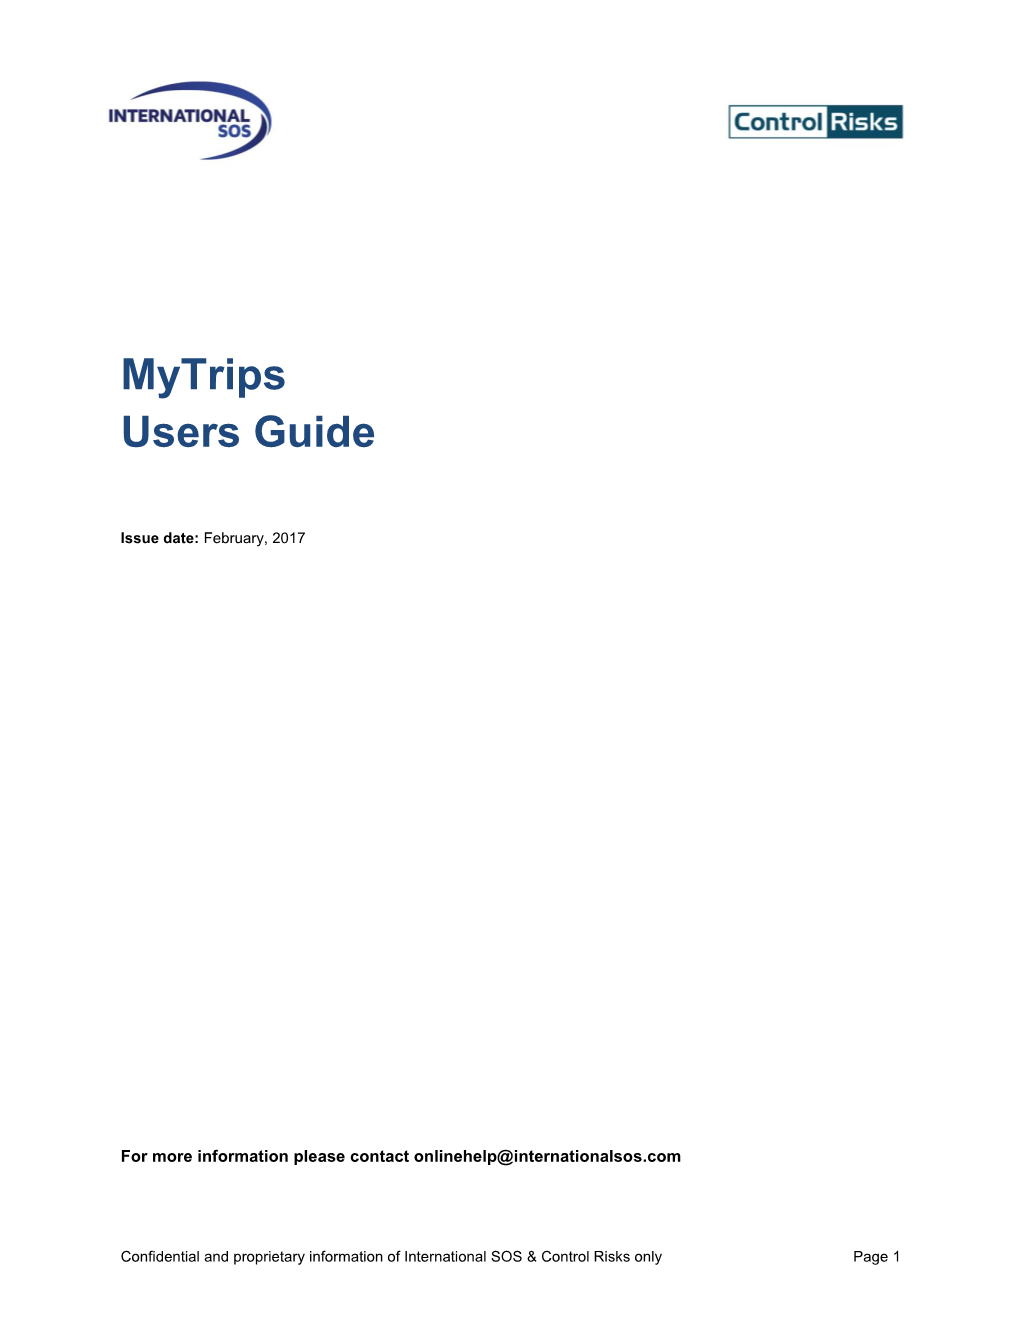 Mytrips Users Guide